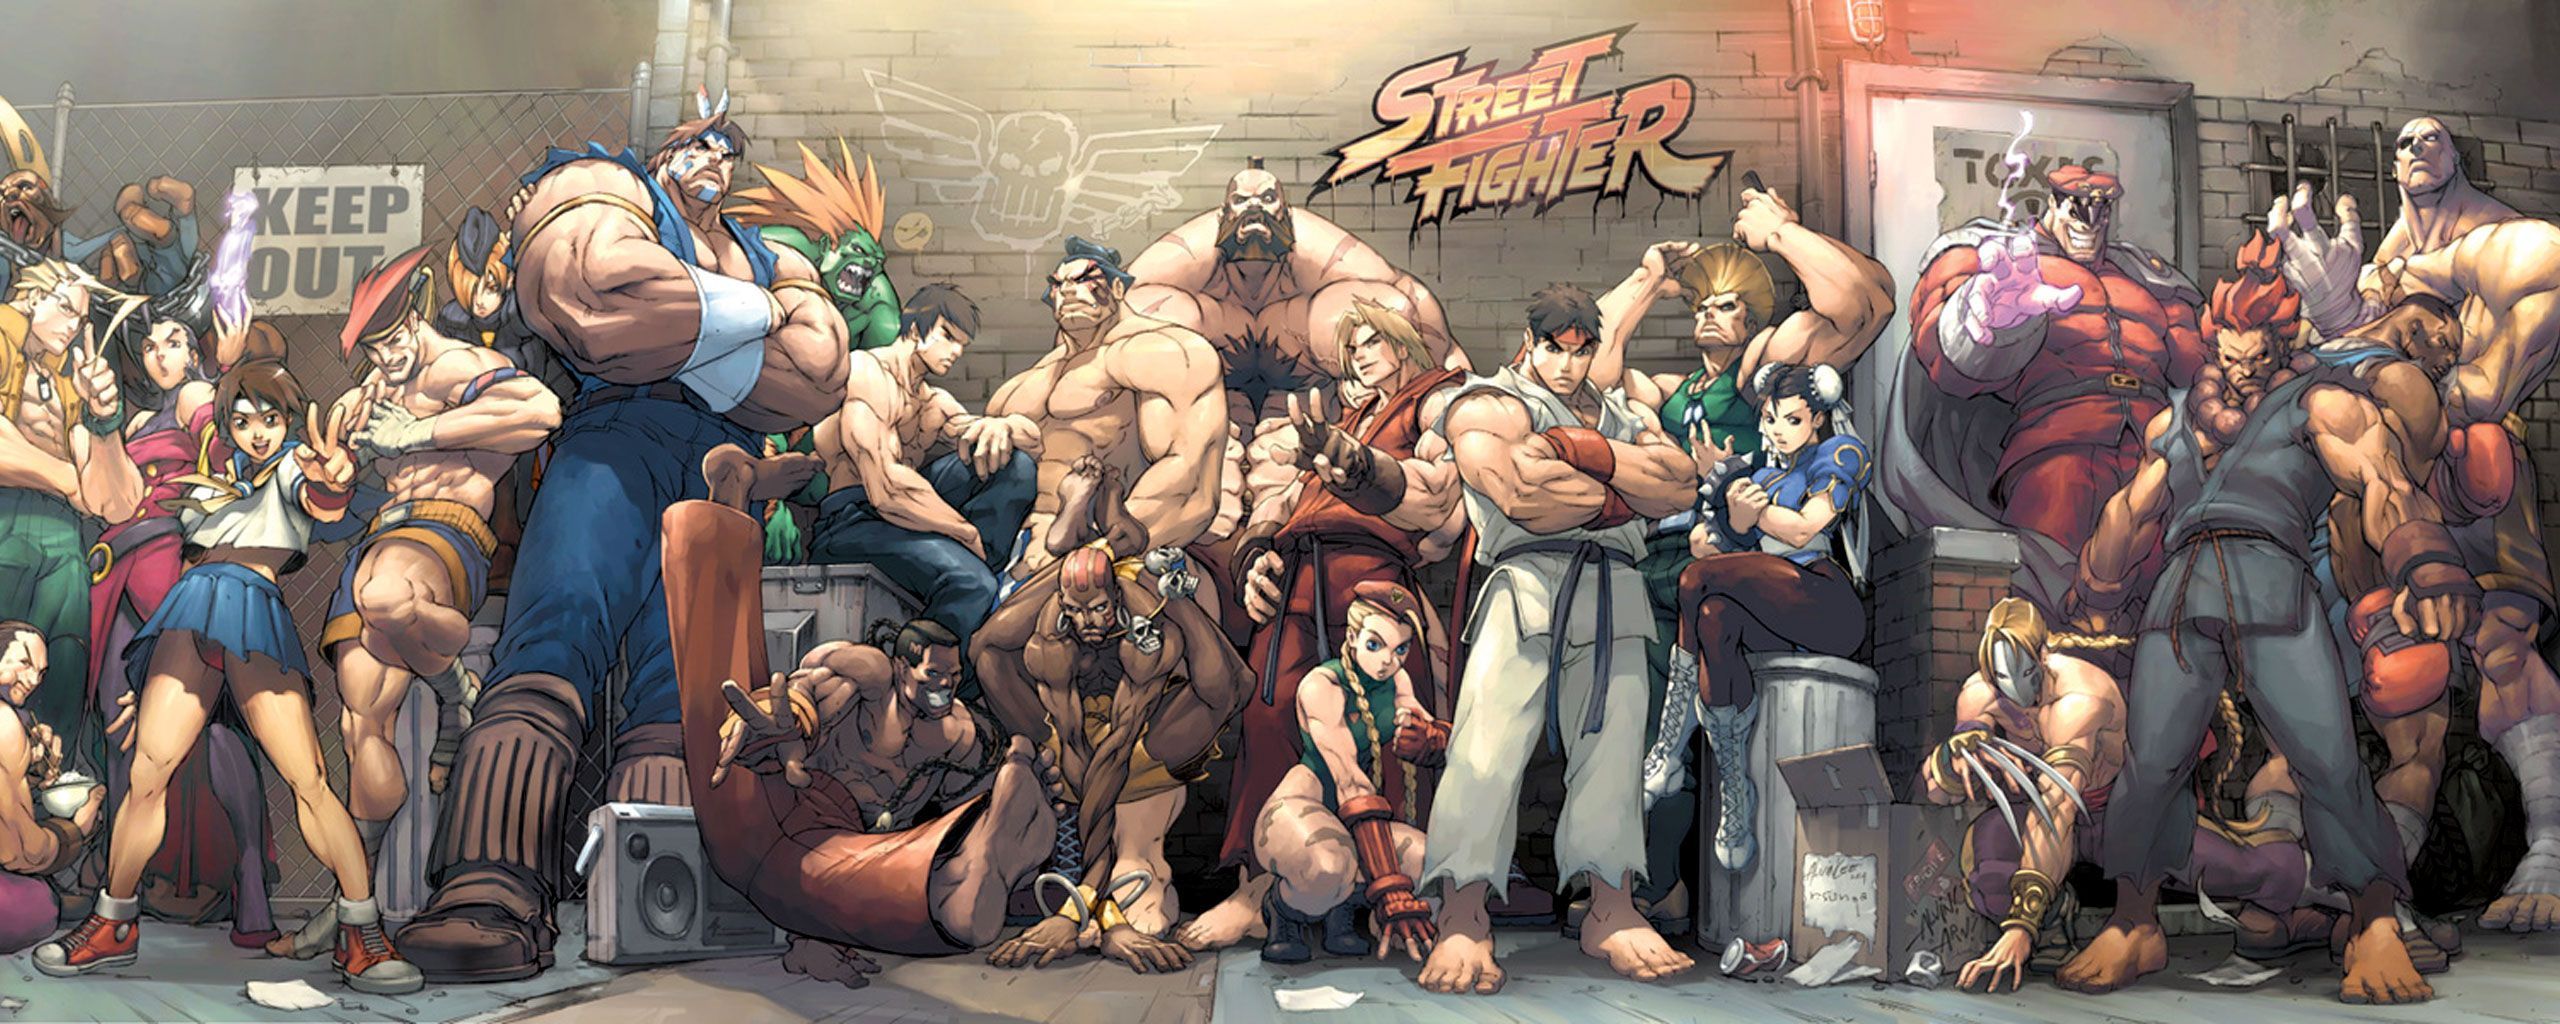 Street Fighter HD Wallpaper For Your